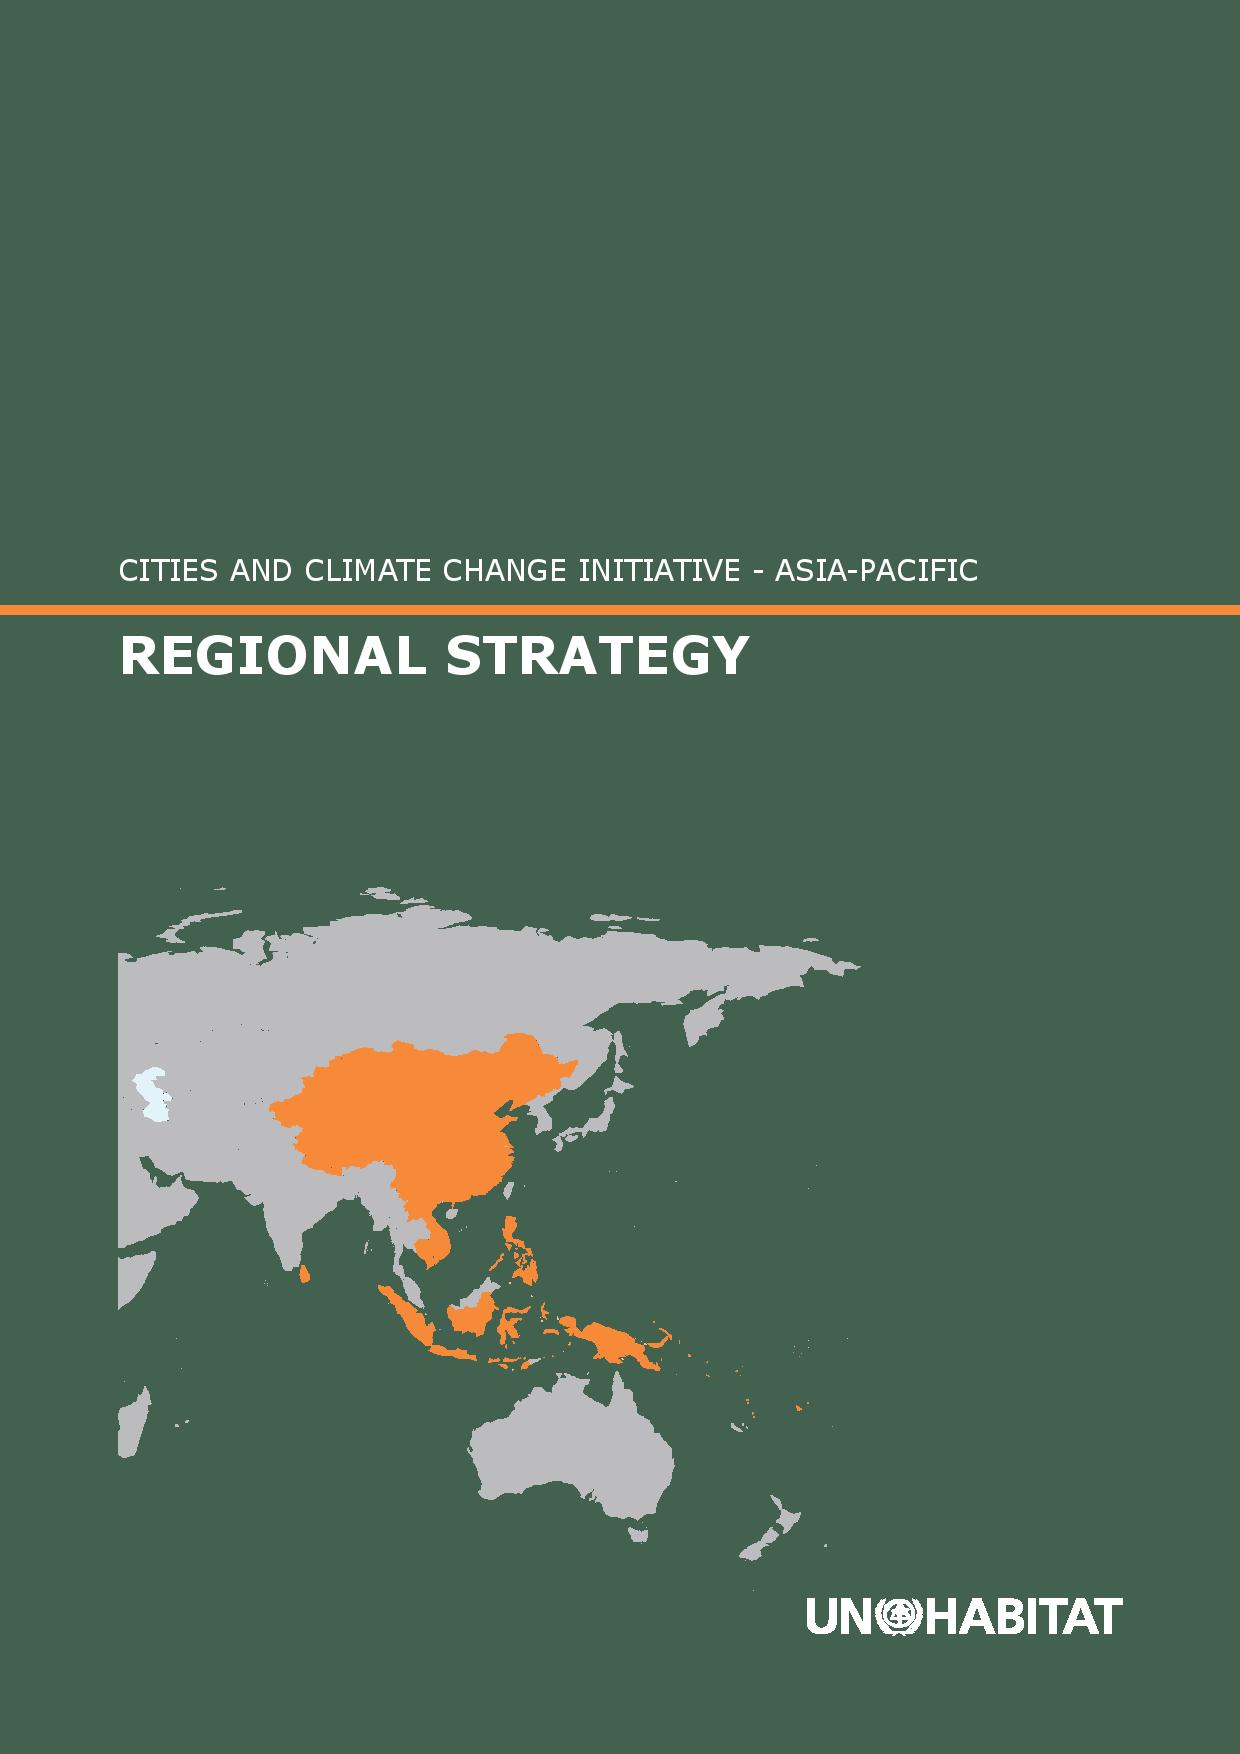 Cities and Climate Change Regional Strategy for Asia Pacific (February 2011)